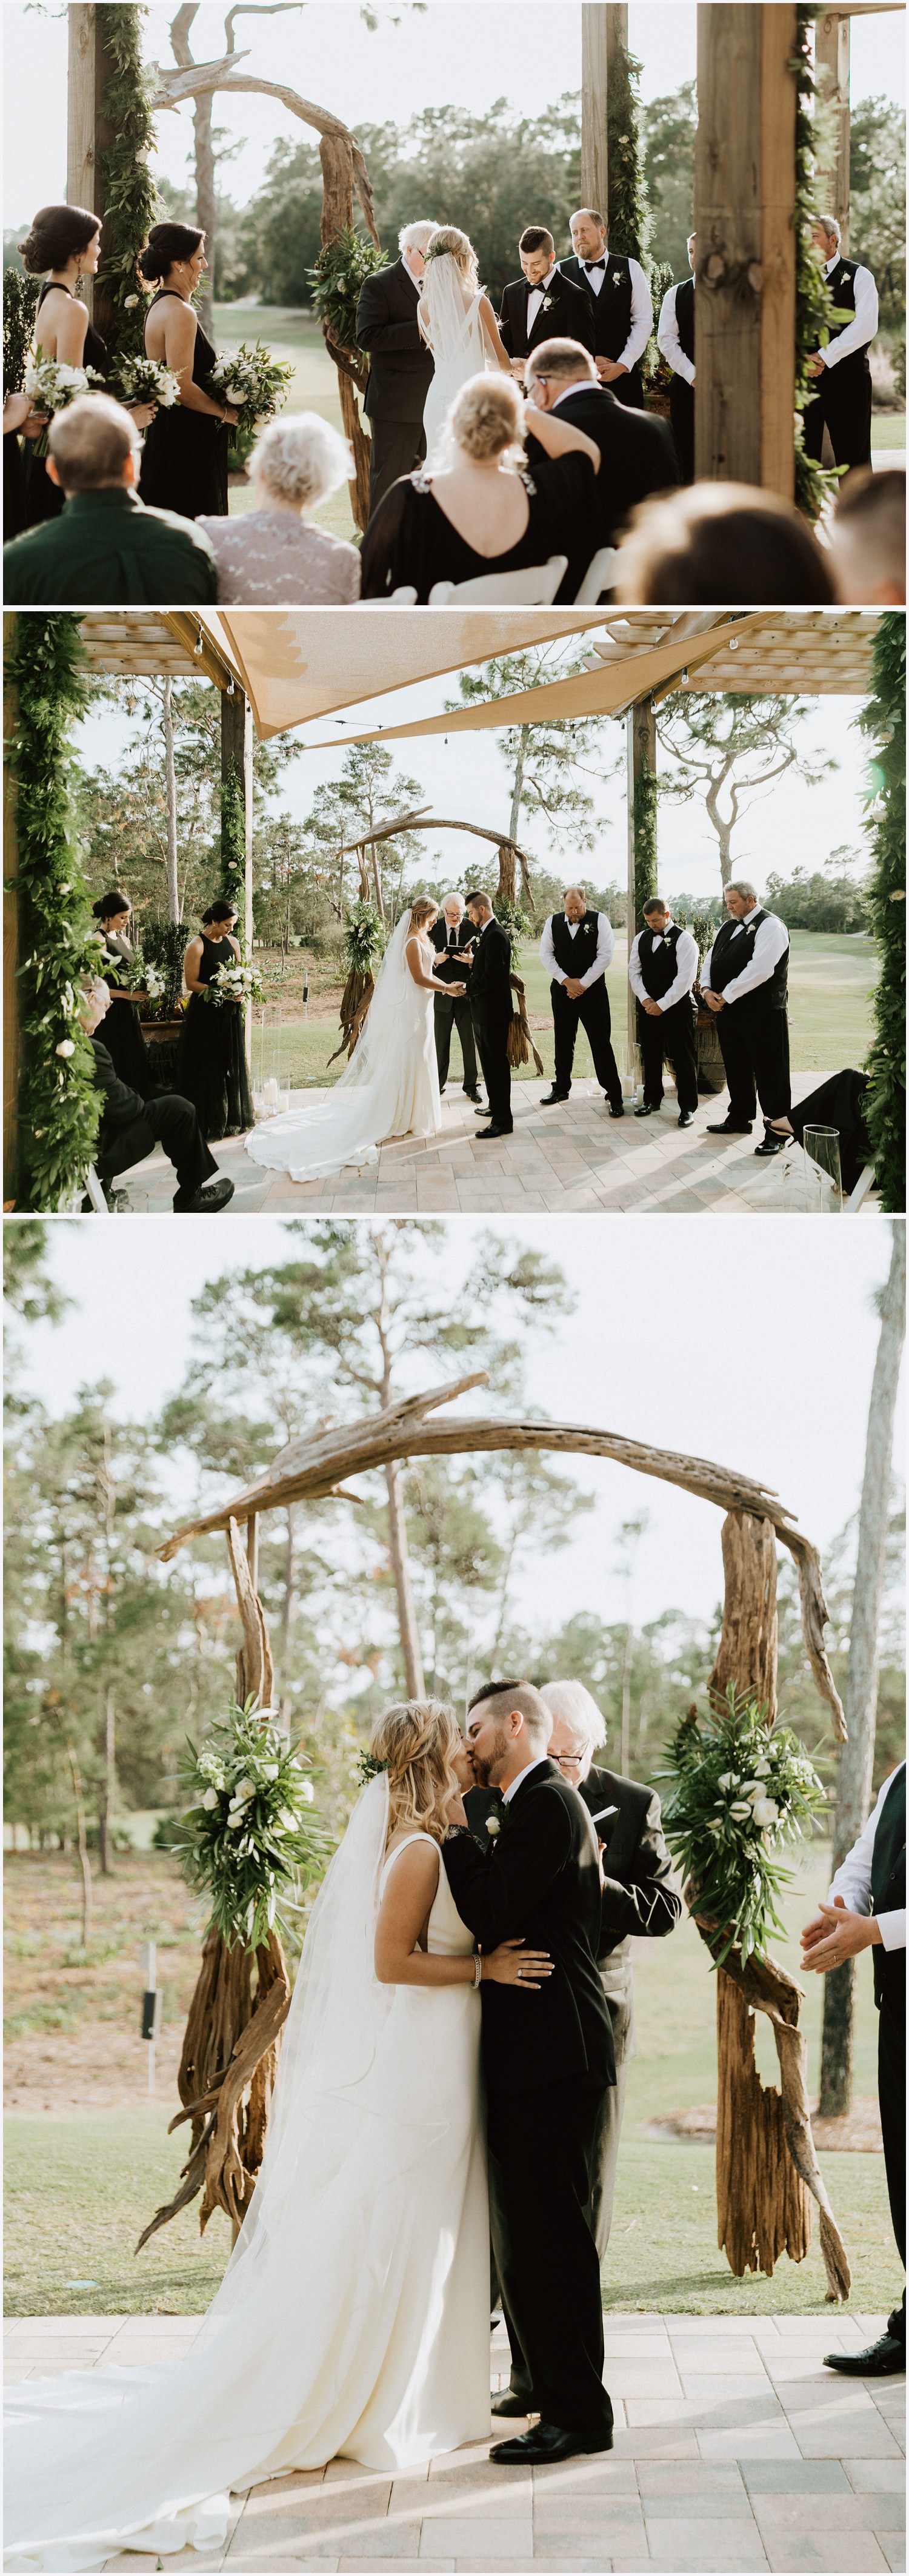 Wedding ceremony at the Shark's Tooth Golf Club